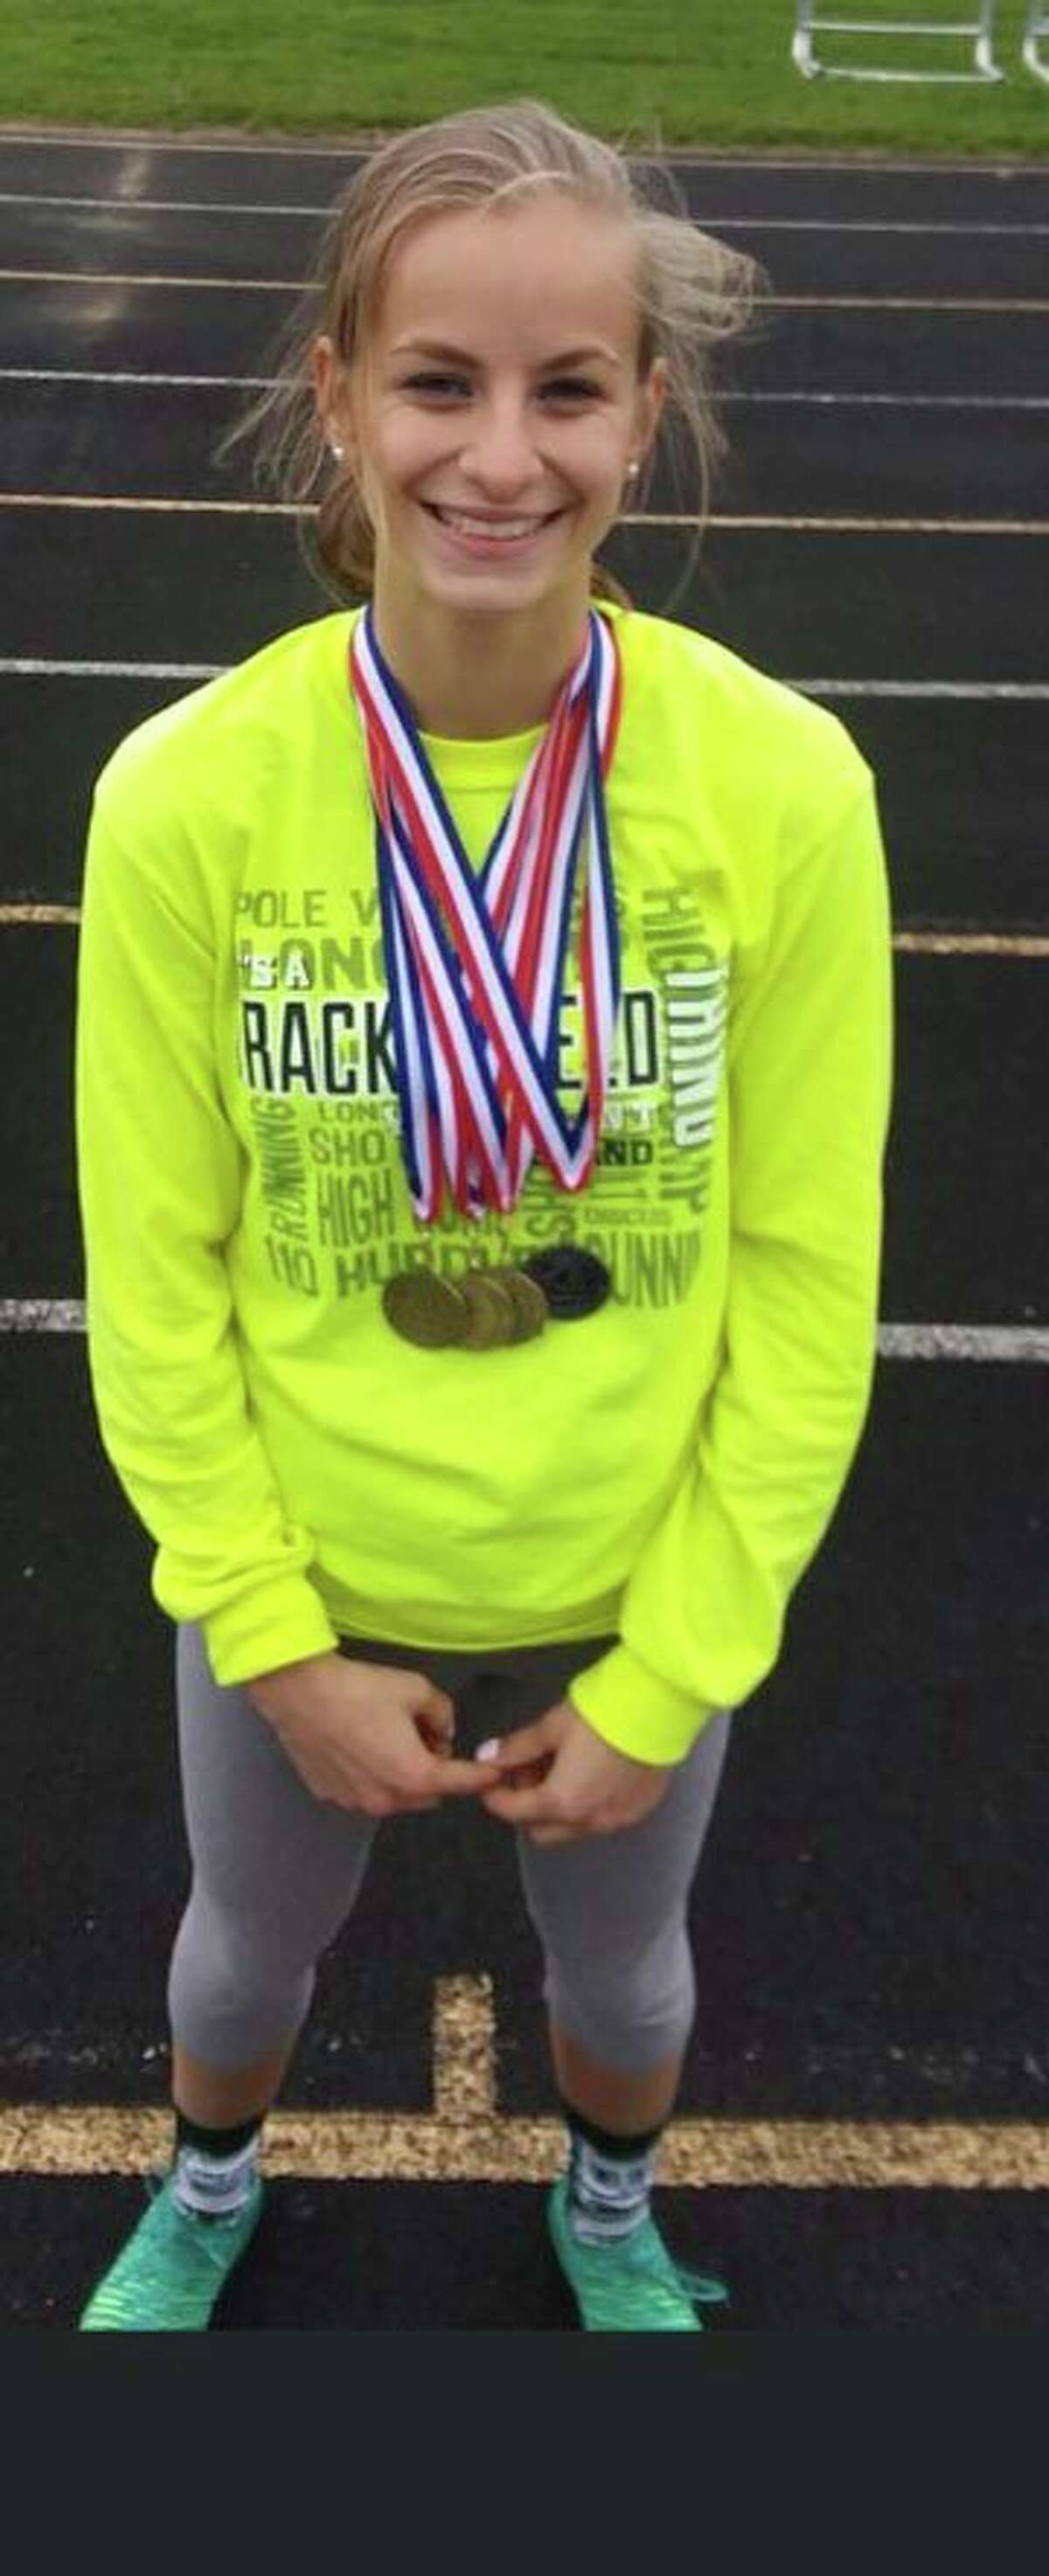 Pine River's Kendra Montague would have been among the area's top sprinters. (Courtesy photo)